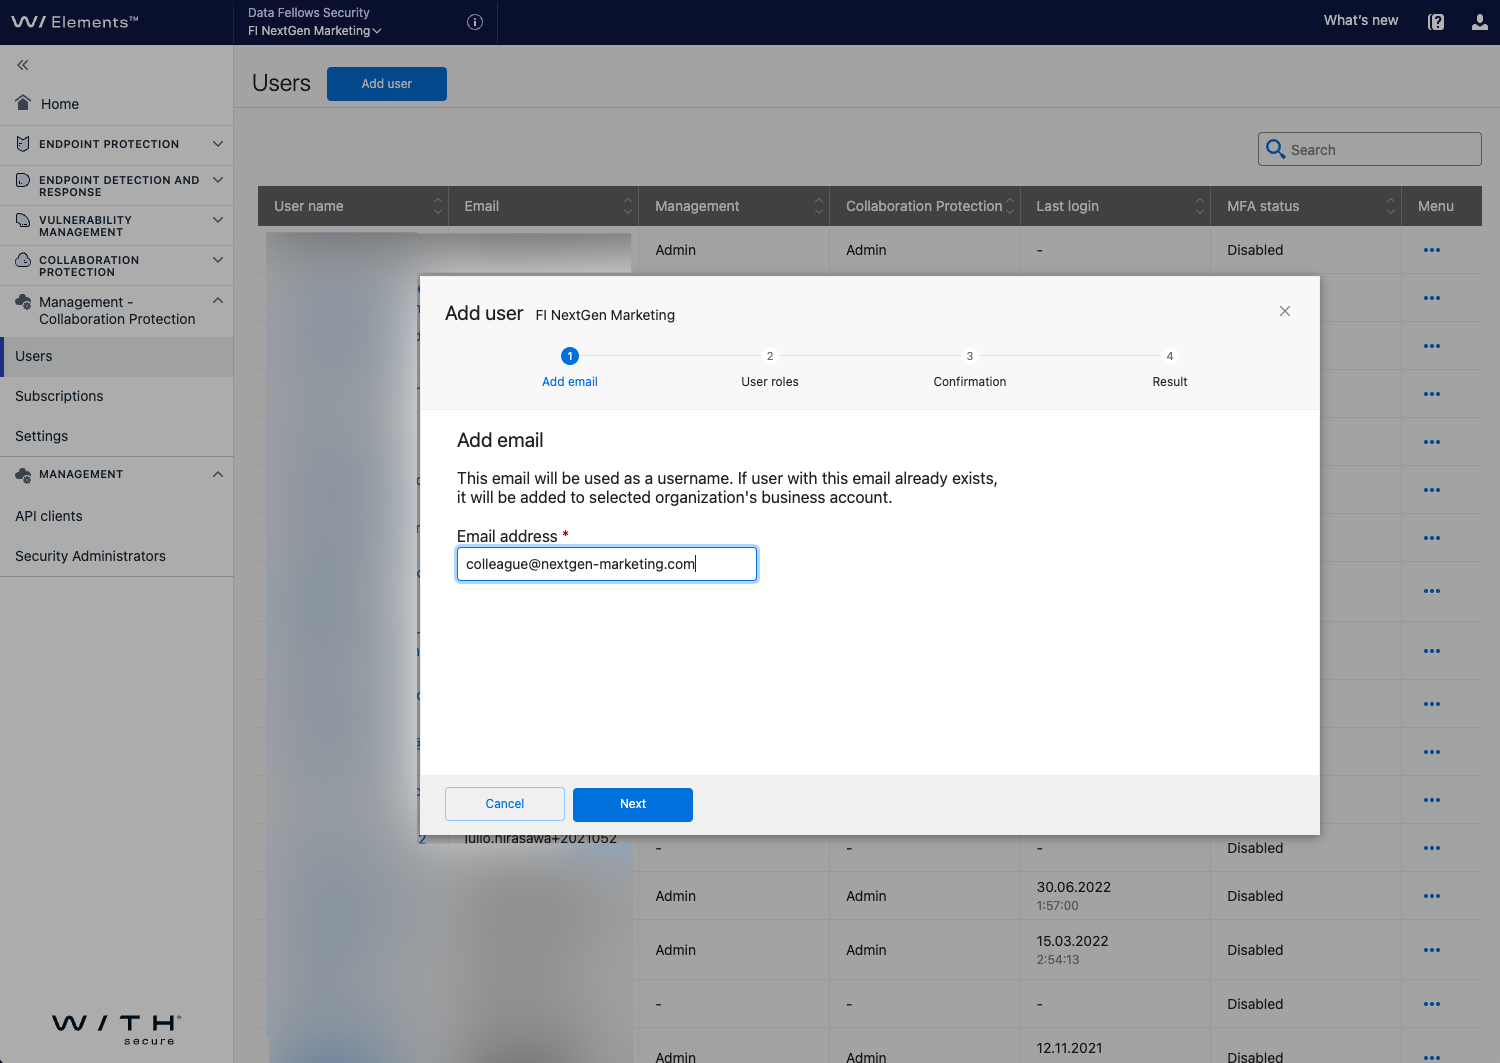 Collaboration protection add new admin